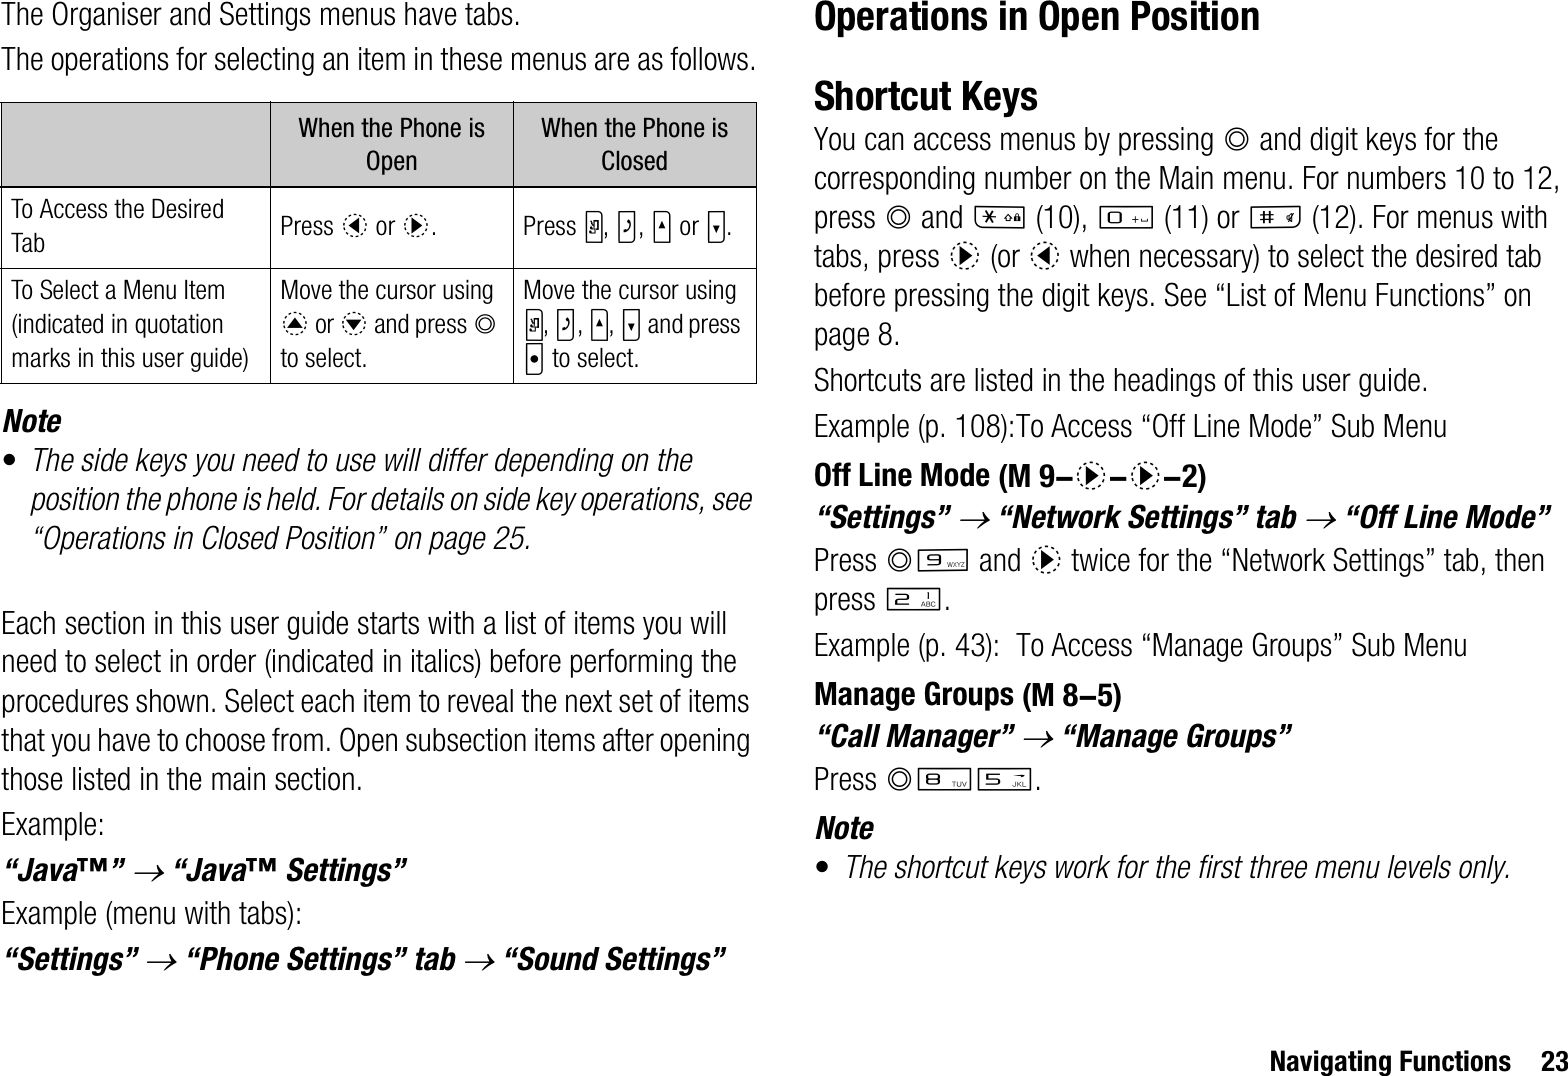 Navigating Functions 23The Organiser and Settings menus have tabs.The operations for selecting an item in these menus are as follows.Note•The side keys you need to use will differ depending on the position the phone is held. For details on side key operations, see “Operations in Closed Position” on page 25.Each section in this user guide starts with a list of items you will need to select in order (indicated in italics) before performing the procedures shown. Select each item to reveal the next set of items that you have to choose from. Open subsection items after opening those listed in the main section.Example:“Java™”o “Java™ Settings”Example (menu with tabs):“Settings” o “Phone Settings” tab o “Sound Settings”Operations in Open PositionShortcut KeysYou can access menus by pressing B and digit keys for the corresponding number on the Main menu. For numbers 10 to 12, press B and P (10), Q (11) or R (12). For menus with tabs, press d (or c when necessary) to select the desired tab before pressing the digit keys. See “List of Menu Functions” on page 8.Shortcuts are listed in the headings of this user guide.Example (p. 108):To Access “Off Line Mode” Sub MenuOff Line Mode“Settings” o “Network Settings” tab o “Off Line Mode”Press BO and d twice for the “Network Settings” tab, then press H.Example (p. 43): To Access “Manage Groups” Sub MenuManage Groups“Call Manager” o “Manage Groups”Press BNK.Note•The shortcut keys work for the first three menu levels only.When the Phone is OpenWhen the Phone is ClosedTo Access the Desired Tab Press c or d. Press Y,Z,V or W.To Select a Menu Item(indicated in quotation marks in this user guide)Move the cursor using a or b and press Bto select.Move the cursor using Y,Z,V,W and press X to select. (M 9-d-d-2) (M 8-5)